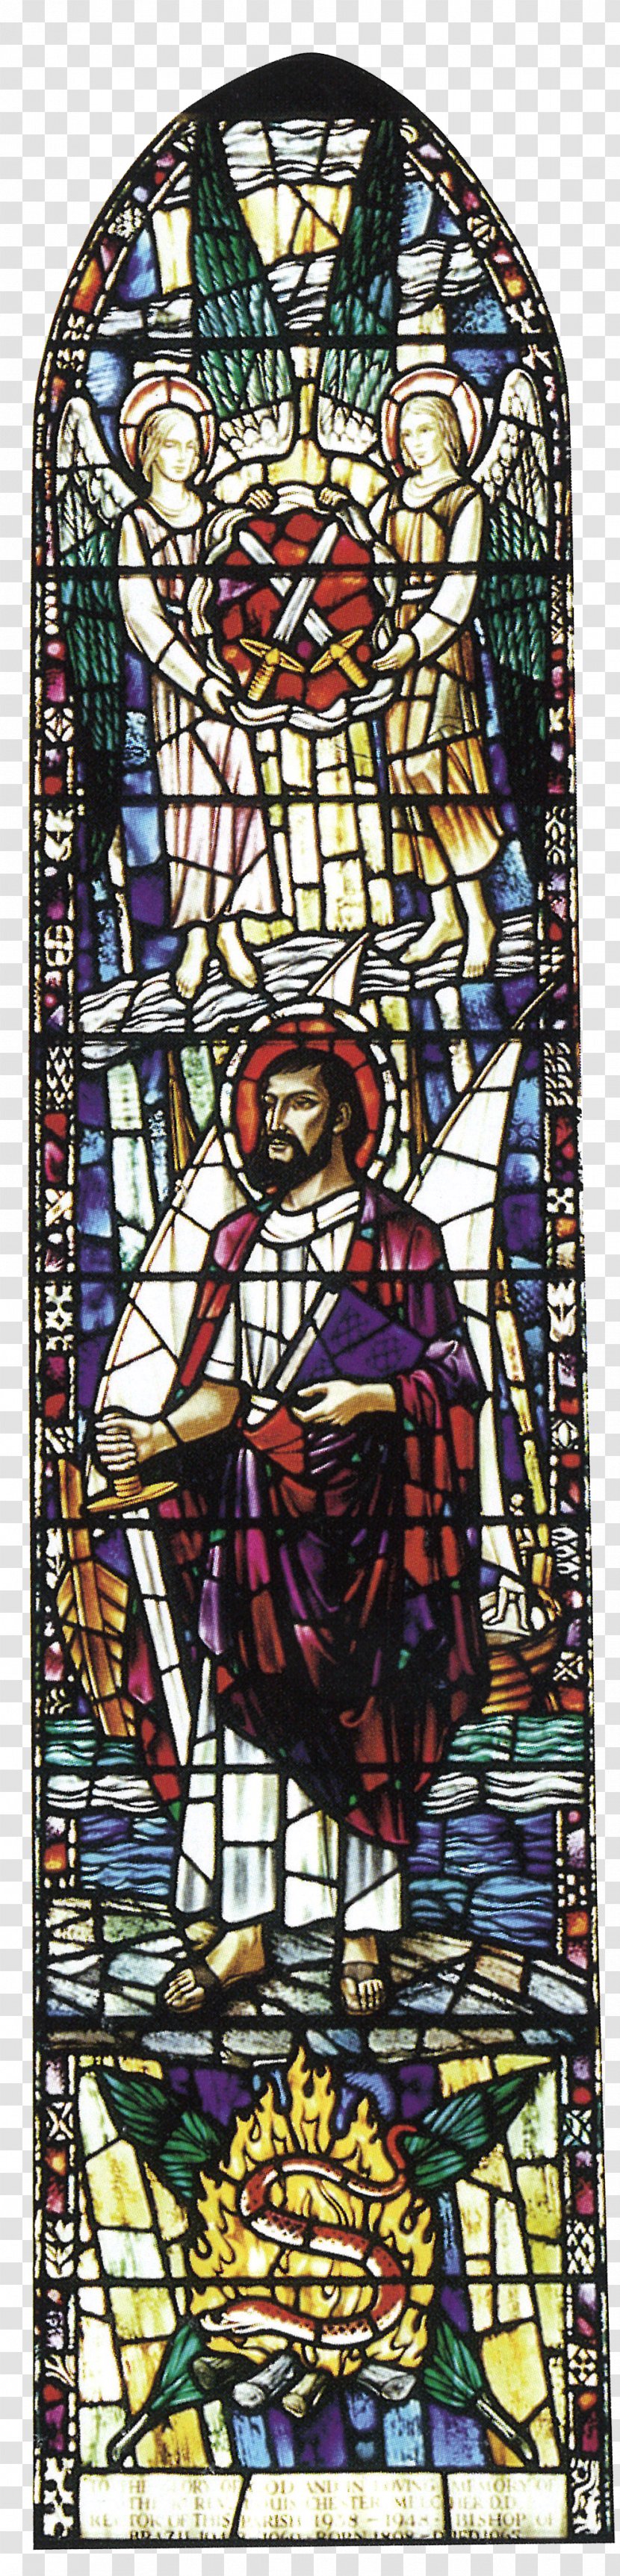 Stained Glass Art Material - St Paul's Cathedral Transparent PNG